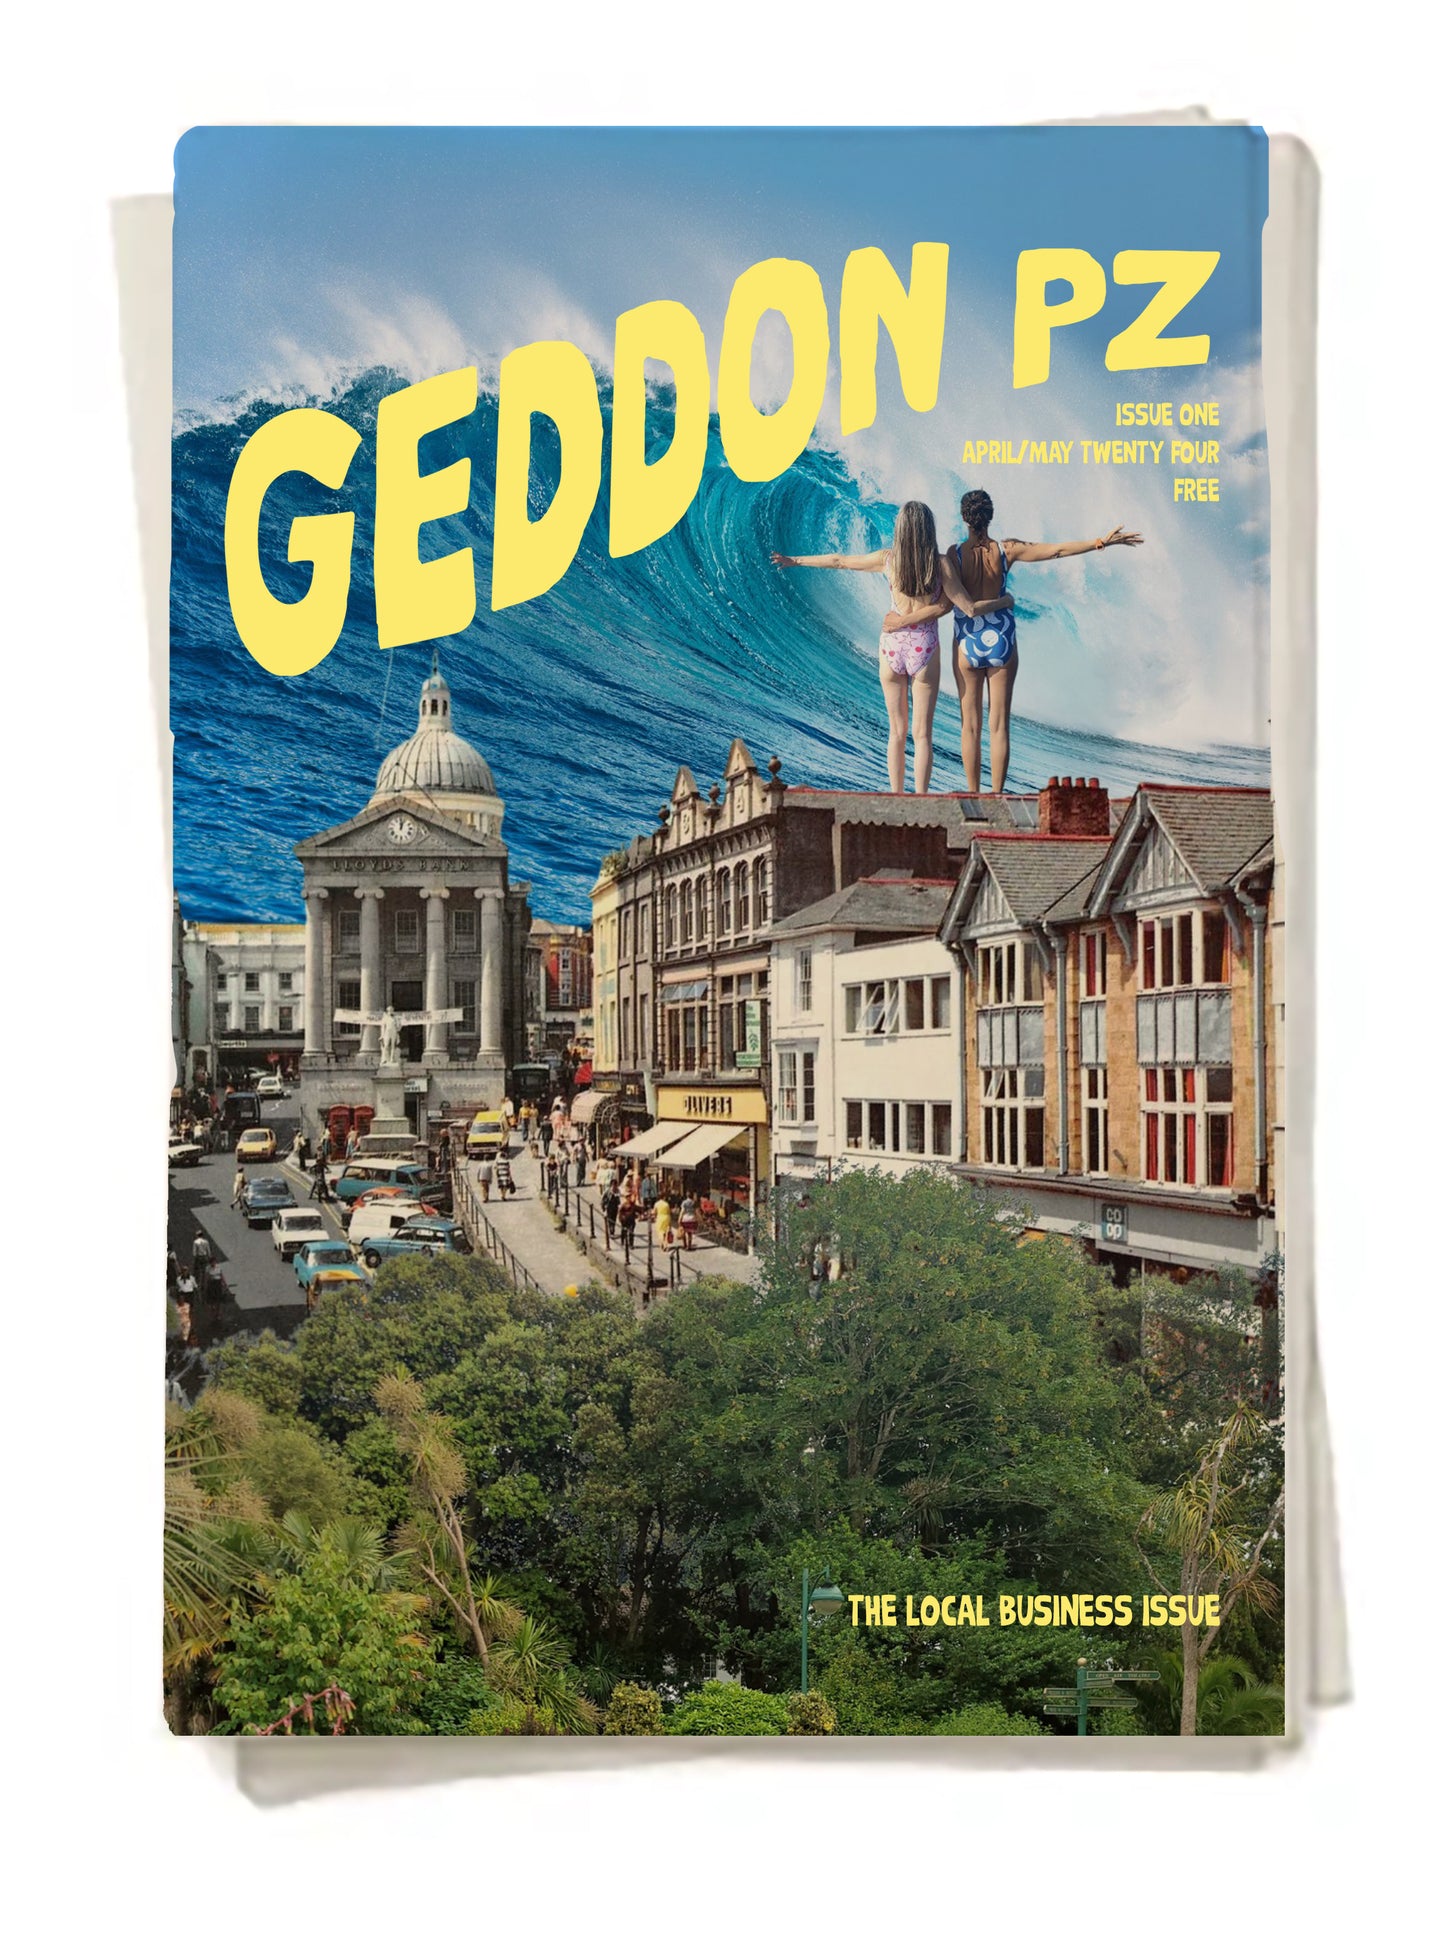 GEDDON PZ advertorial space - Issue 1: April/May